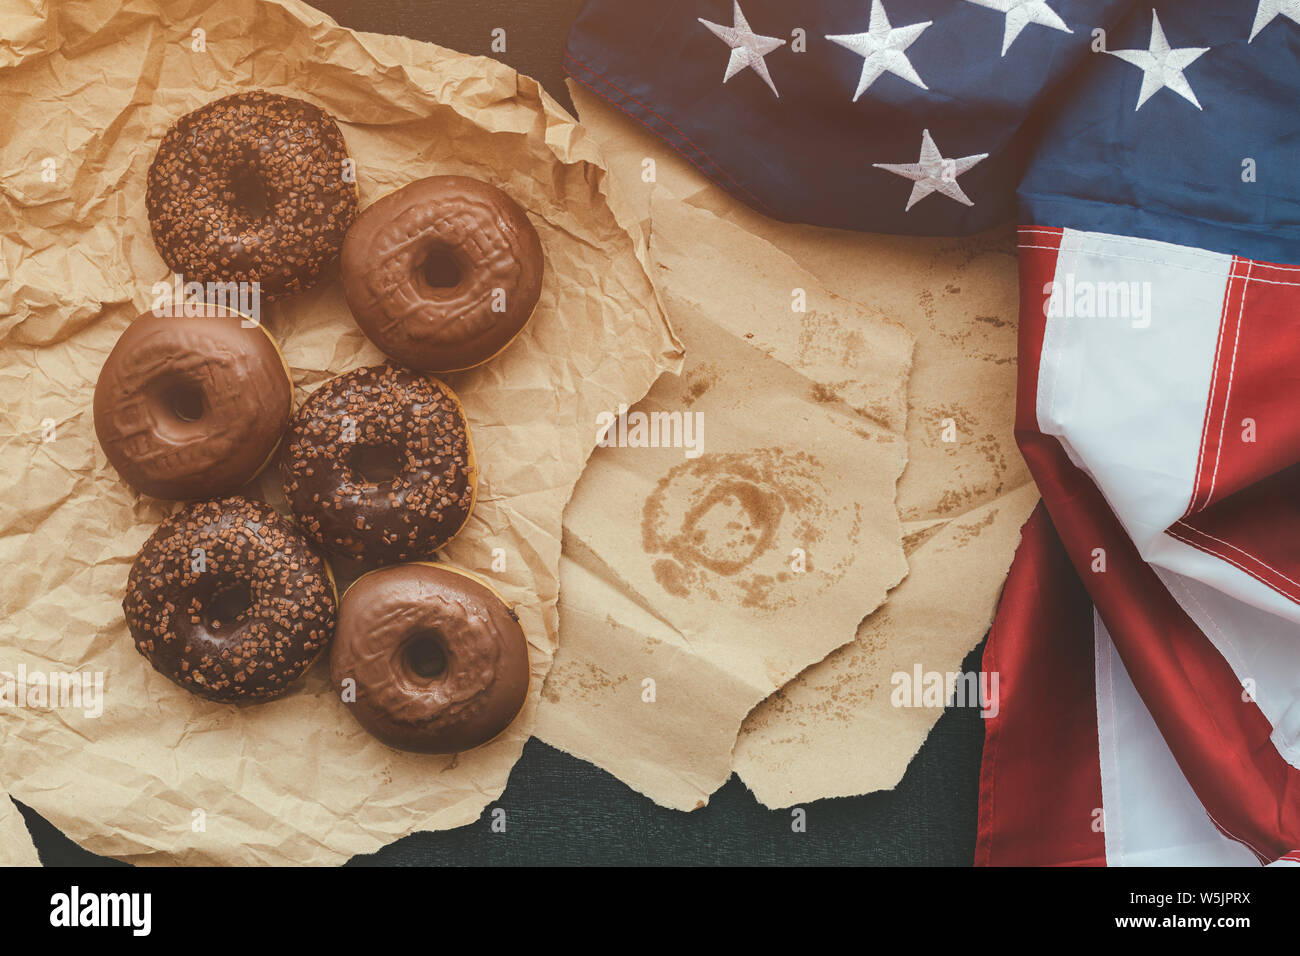 Sweet chocolate donuts and american flag, top view on the table. Traditional homemade doughnut pastry with cream and chocolate crumbs. Stock Photo